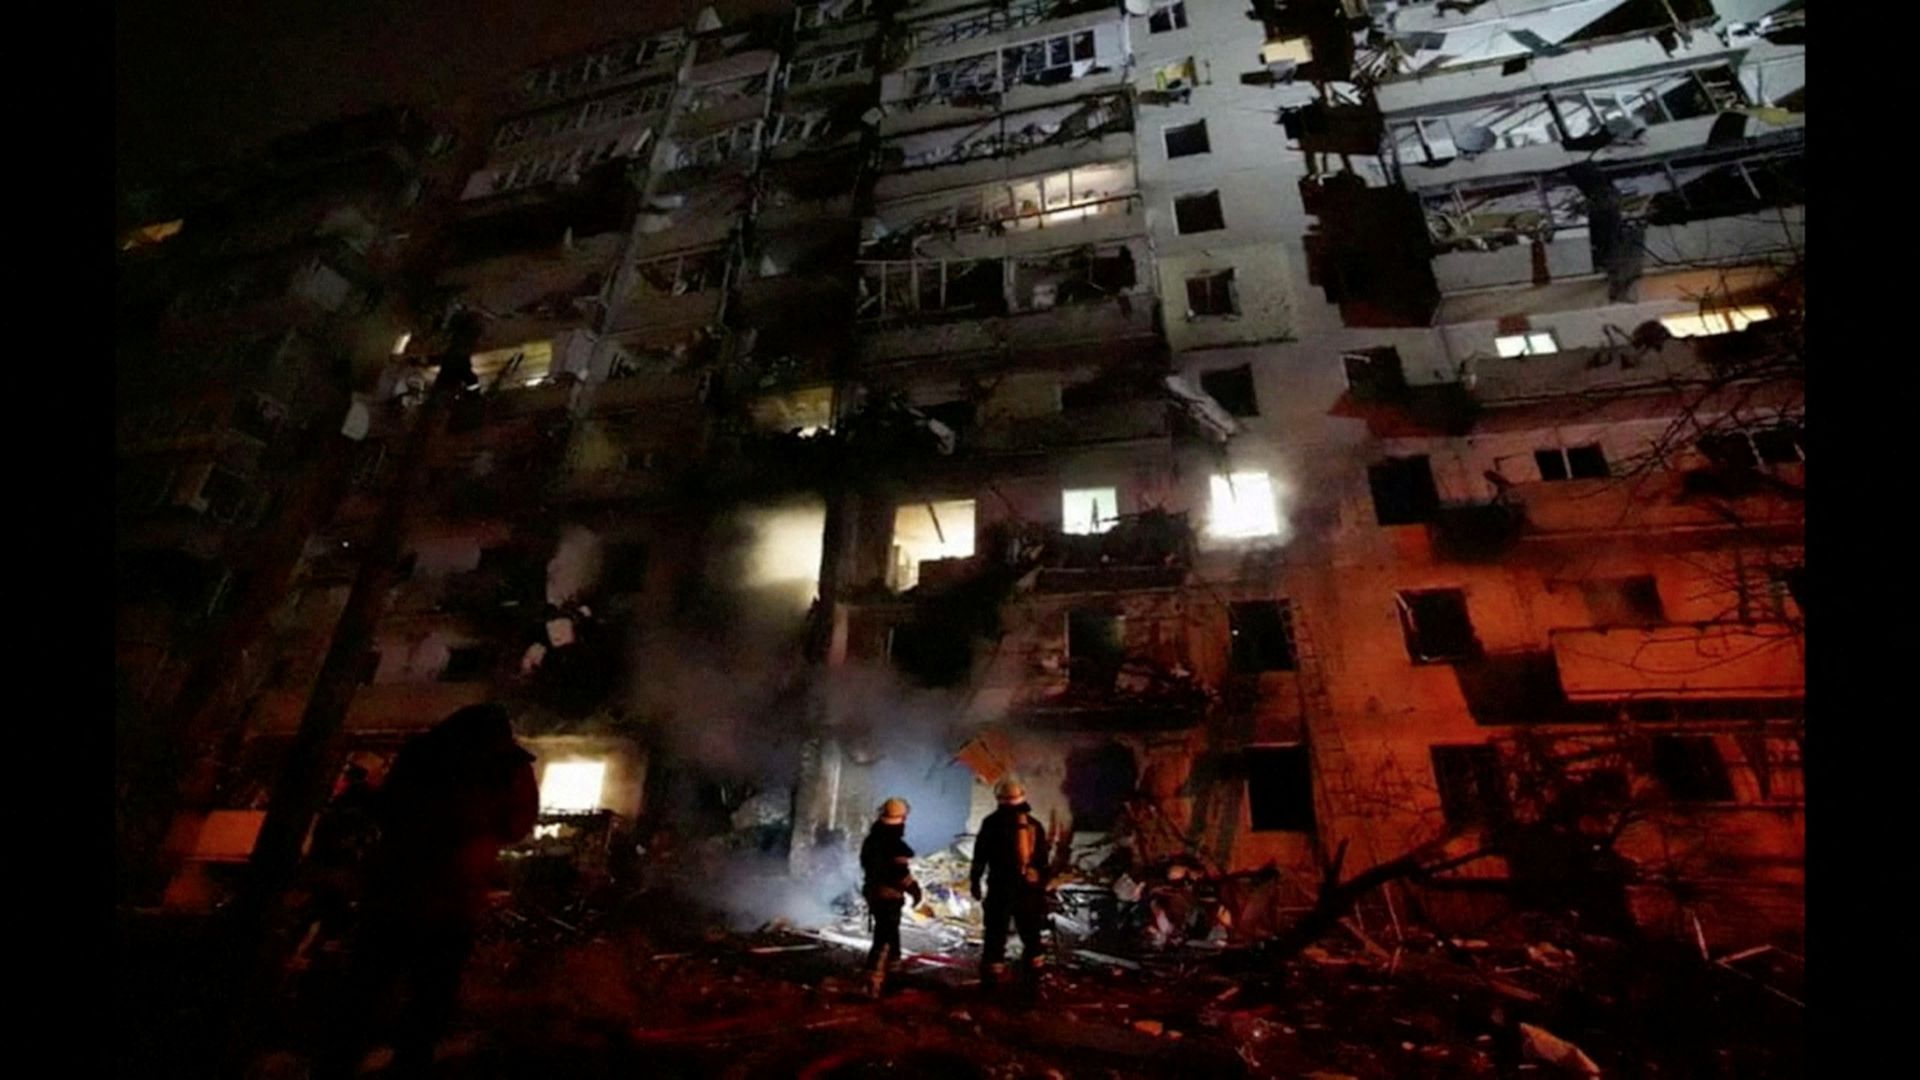 Firefighters work at the site of a damaged residential building, after Russia launched a massive military operation against Ukraine, in Kyiv, Ukraine, Feb. 25, 2022. Screengrab: Ukrainian Ministry of Emergencies/via Reuters